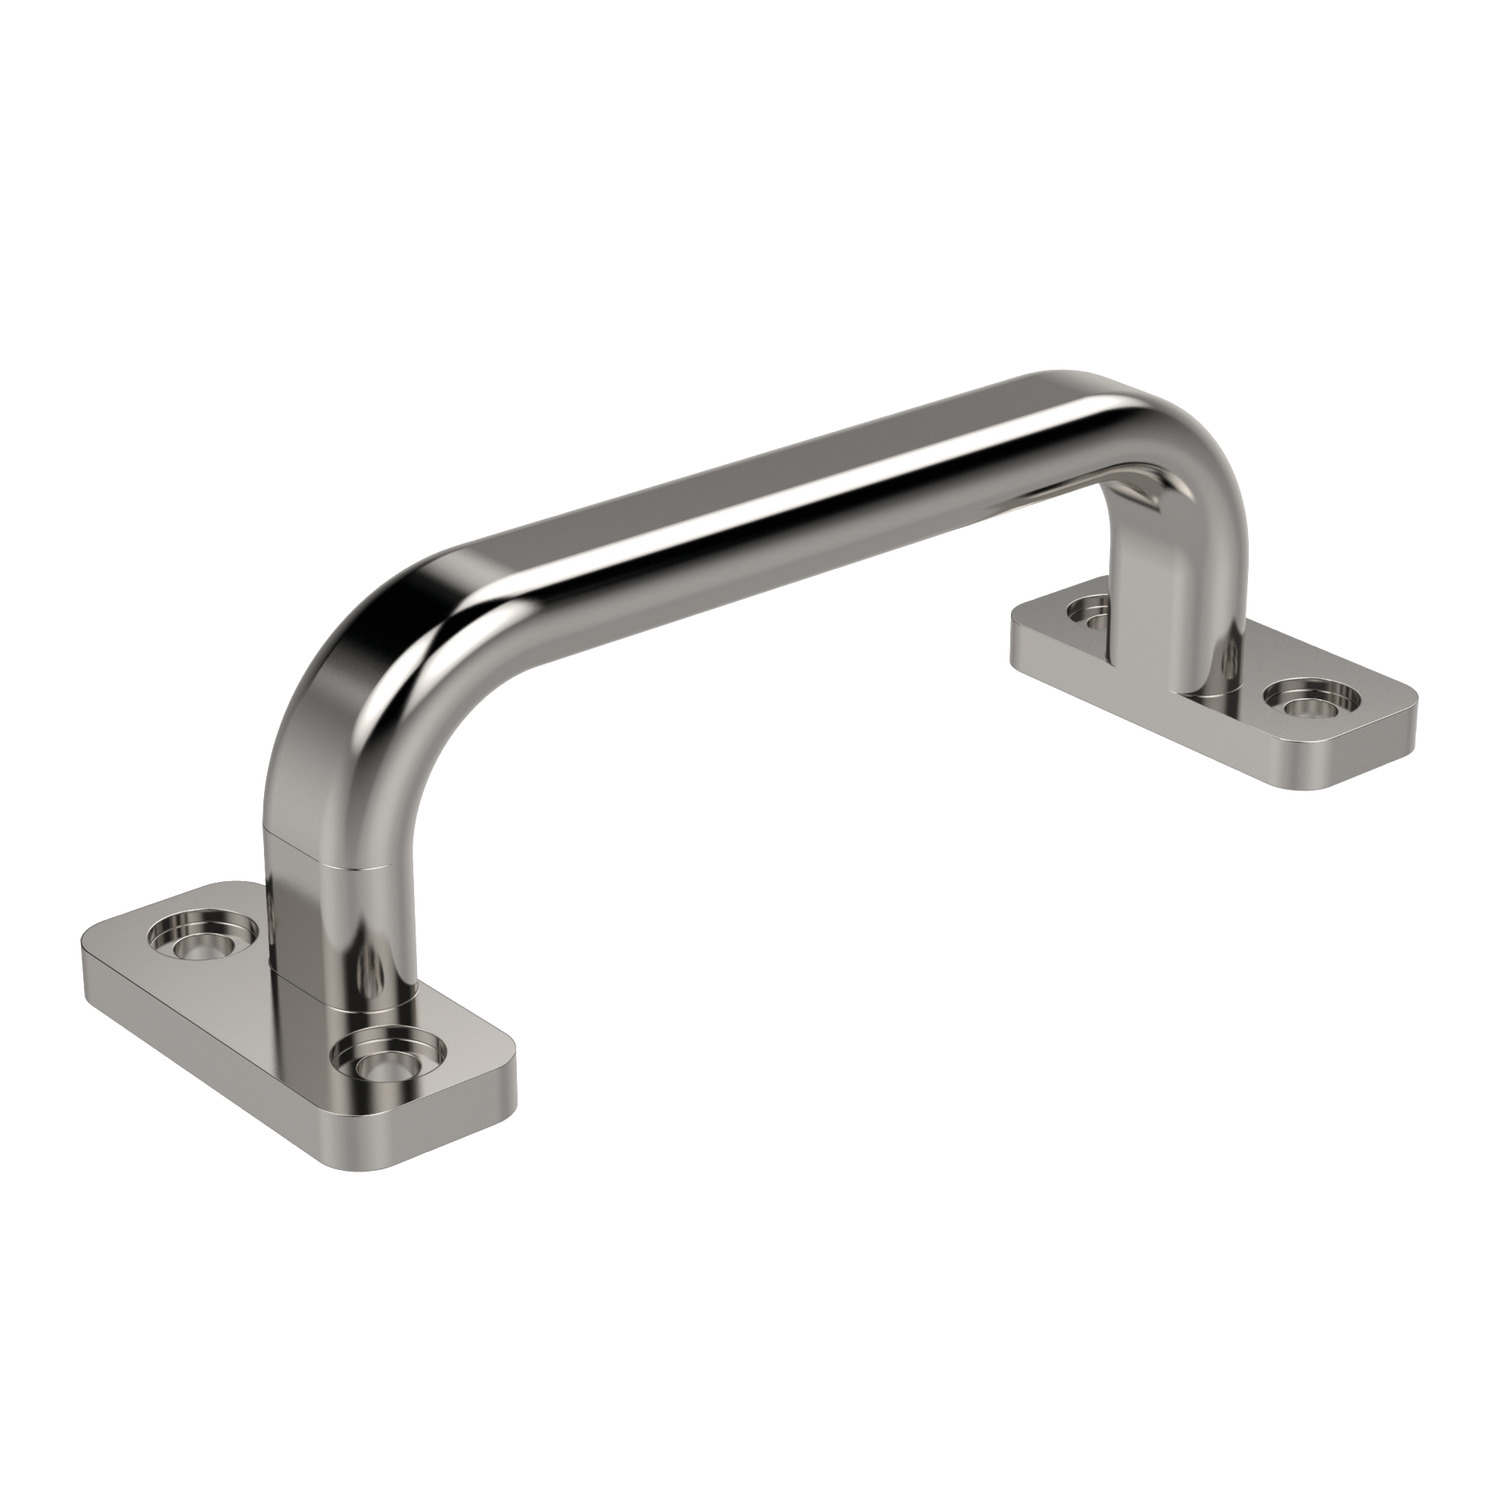 78890 Pull Handles, Stainless Steel